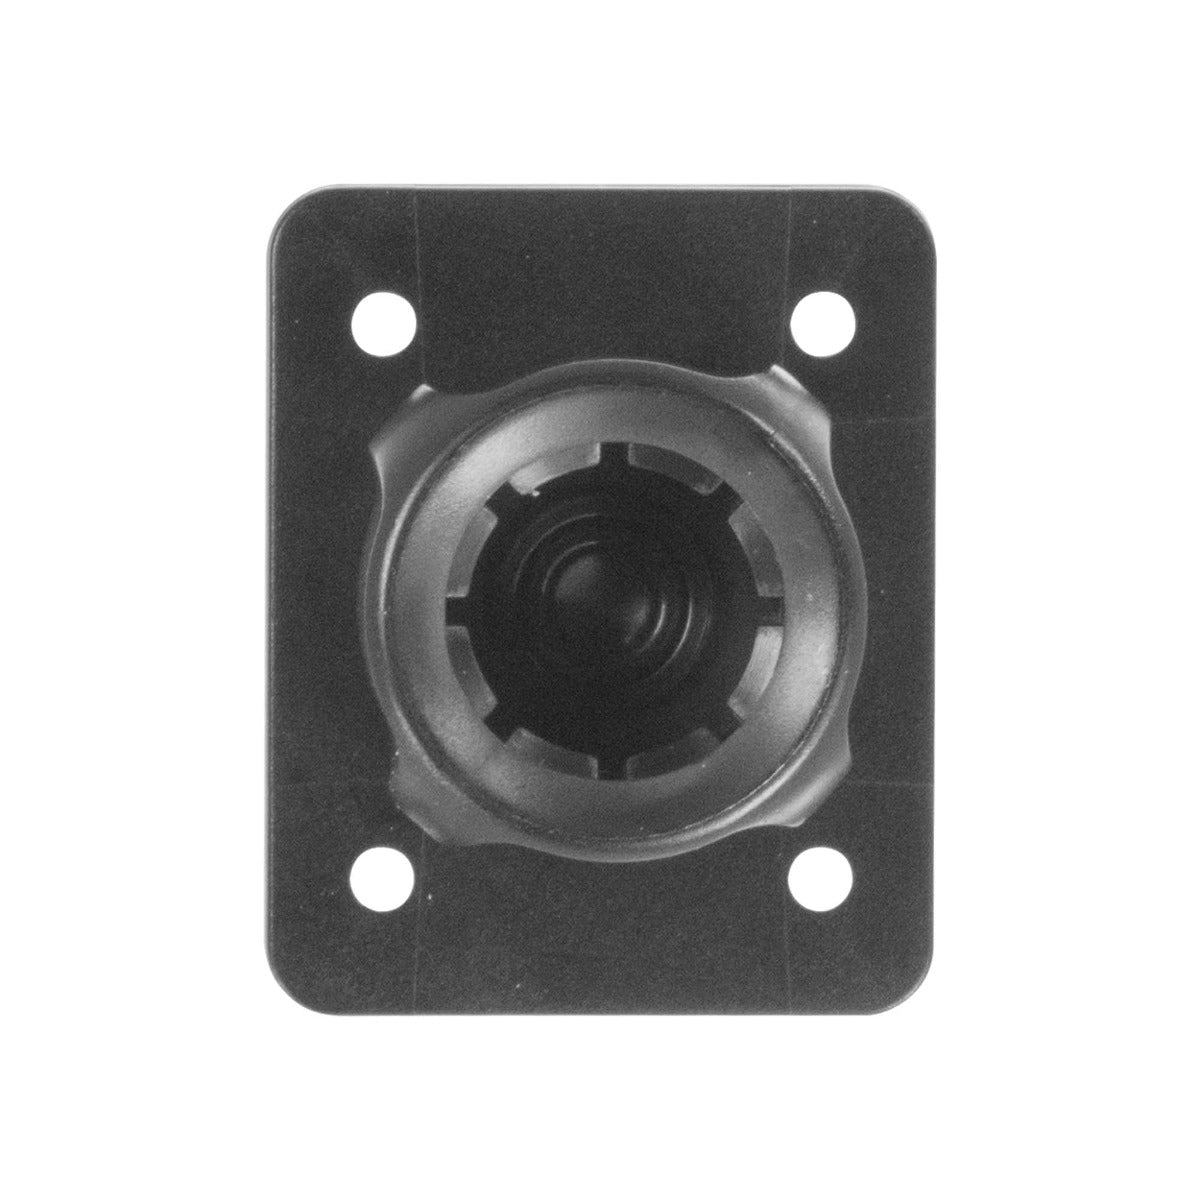 iBOLT 22mm Ball Socket to 4-Hole AMPs Pattern adapter with Tightening Ring